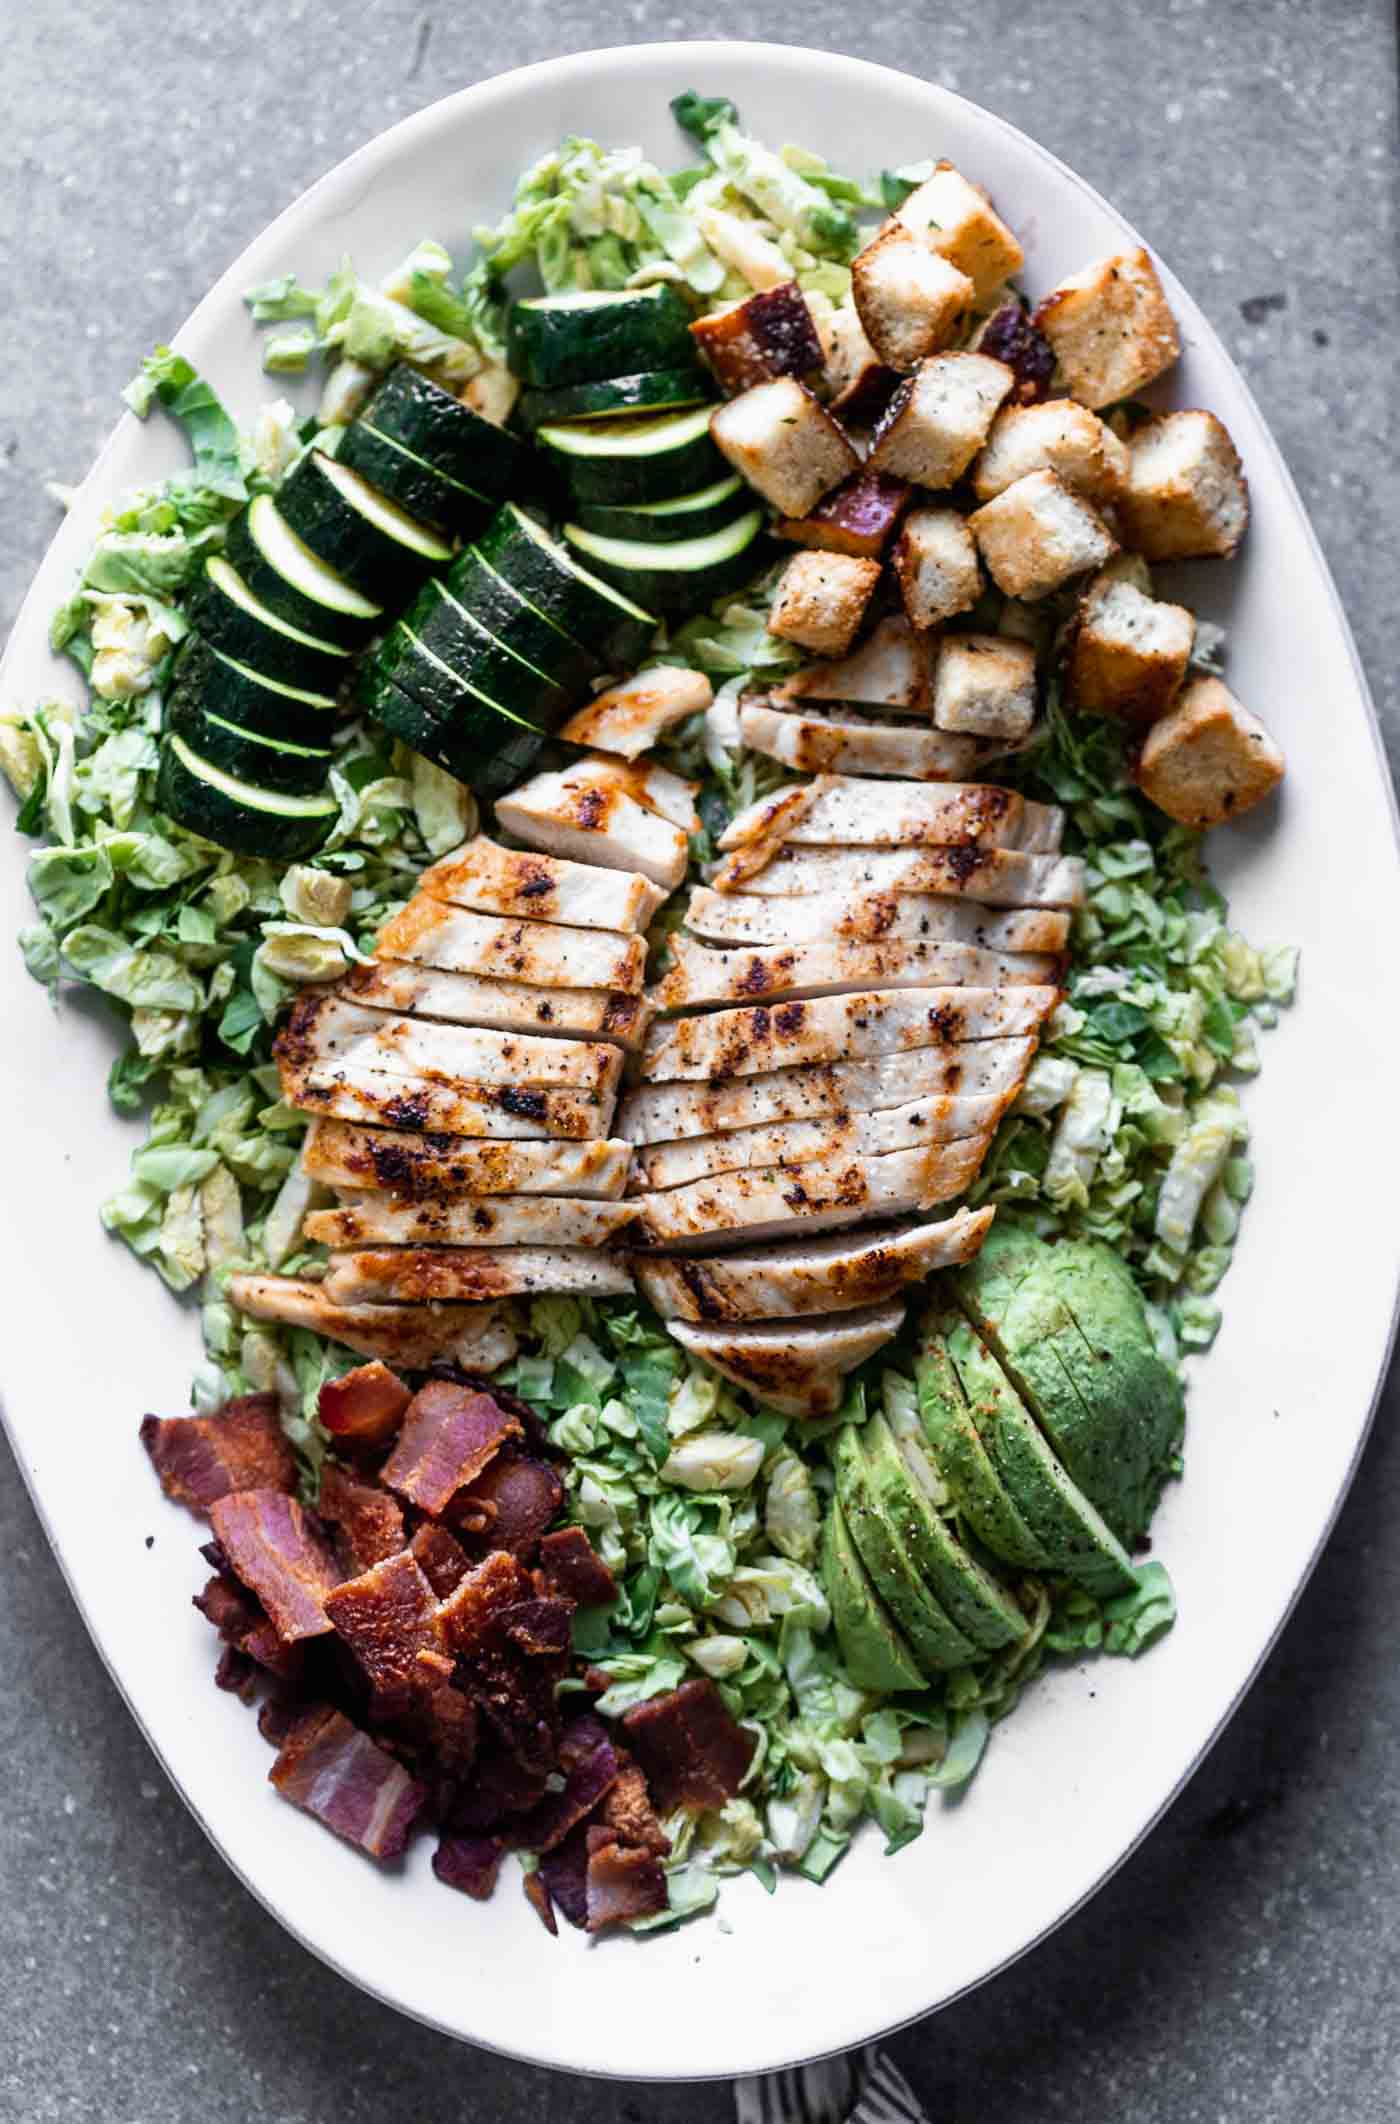 Green Goddess Brussels Sprout Salad with Bacon and Grilled Chicken